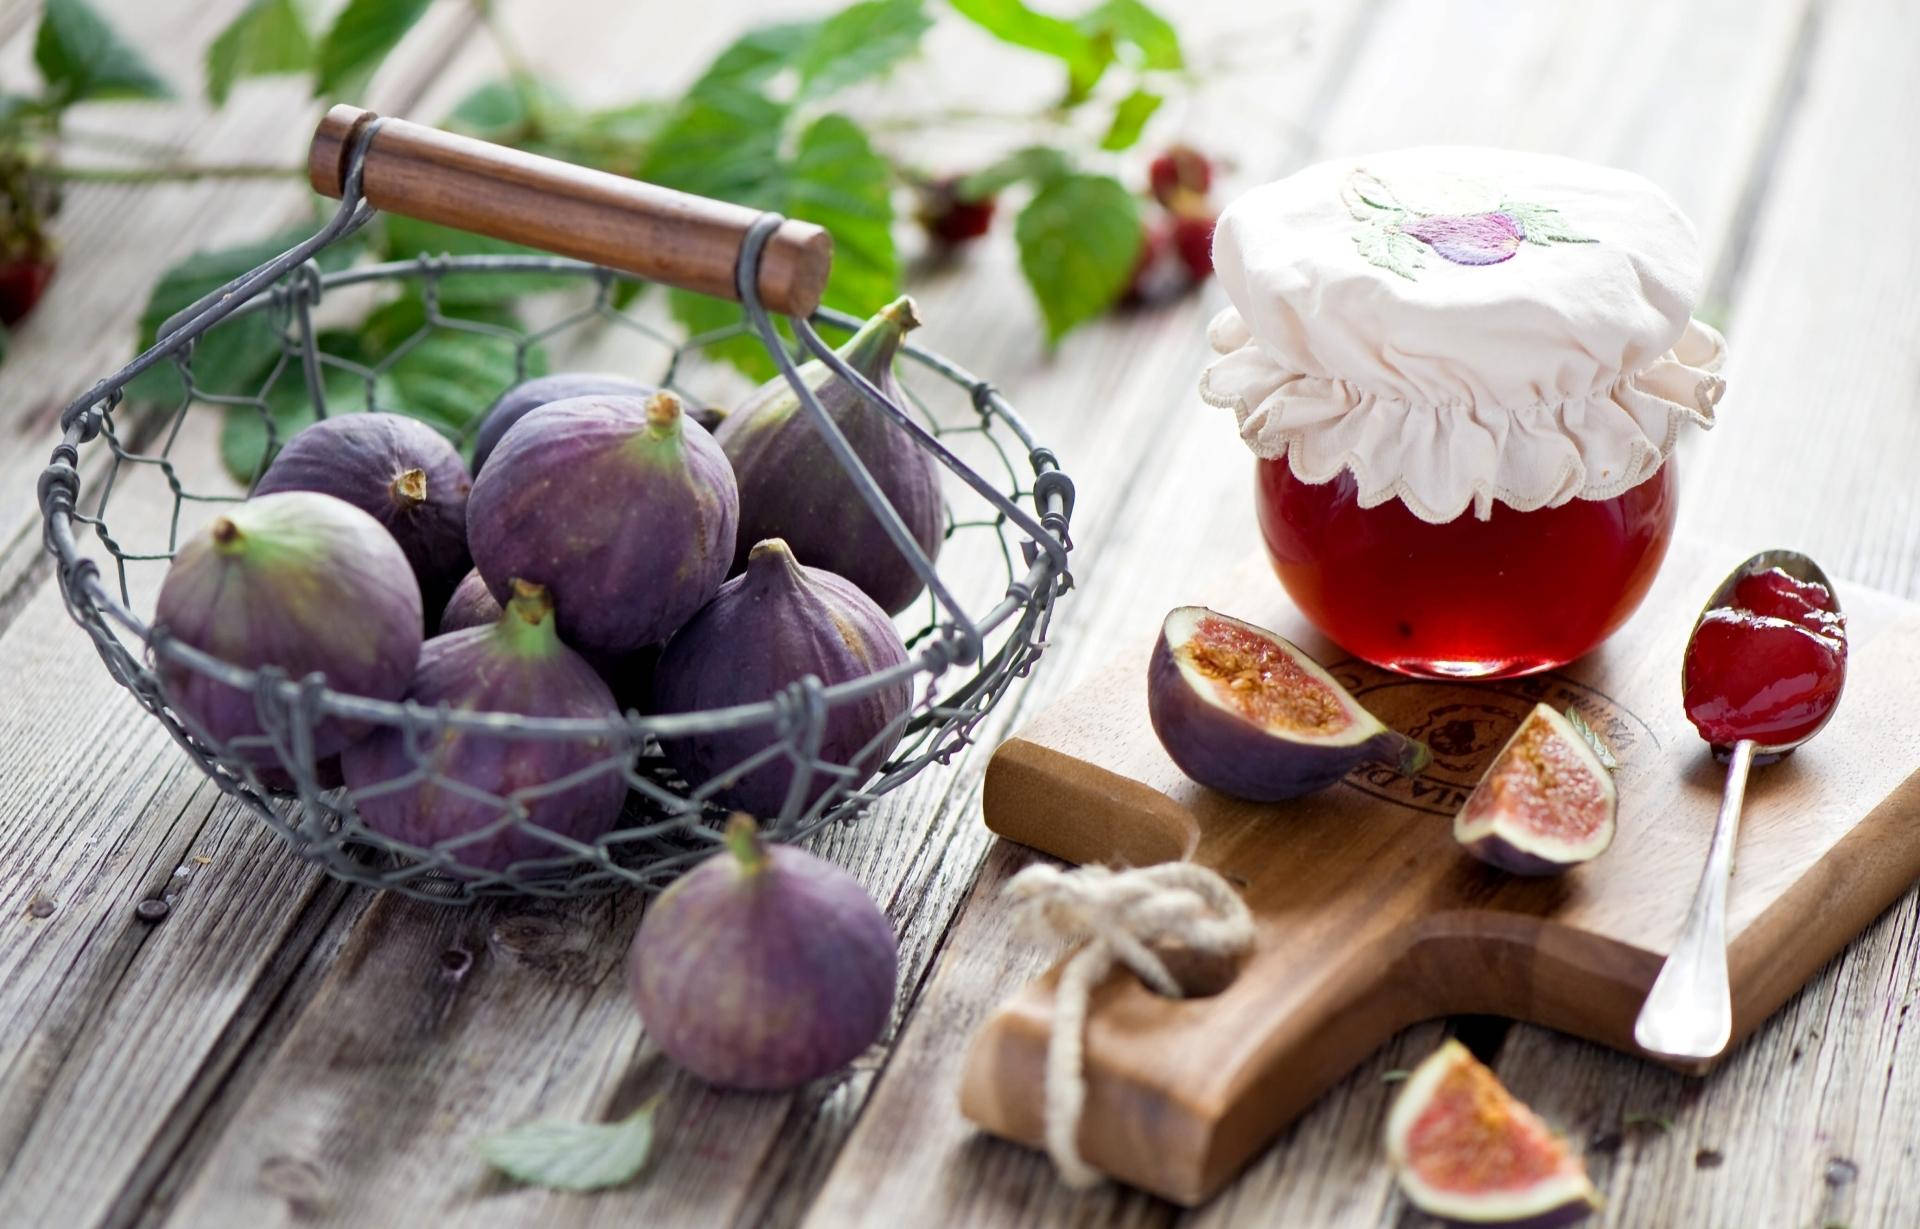 Rustic Display of Figs Jam on a Dining Table Wallpaper